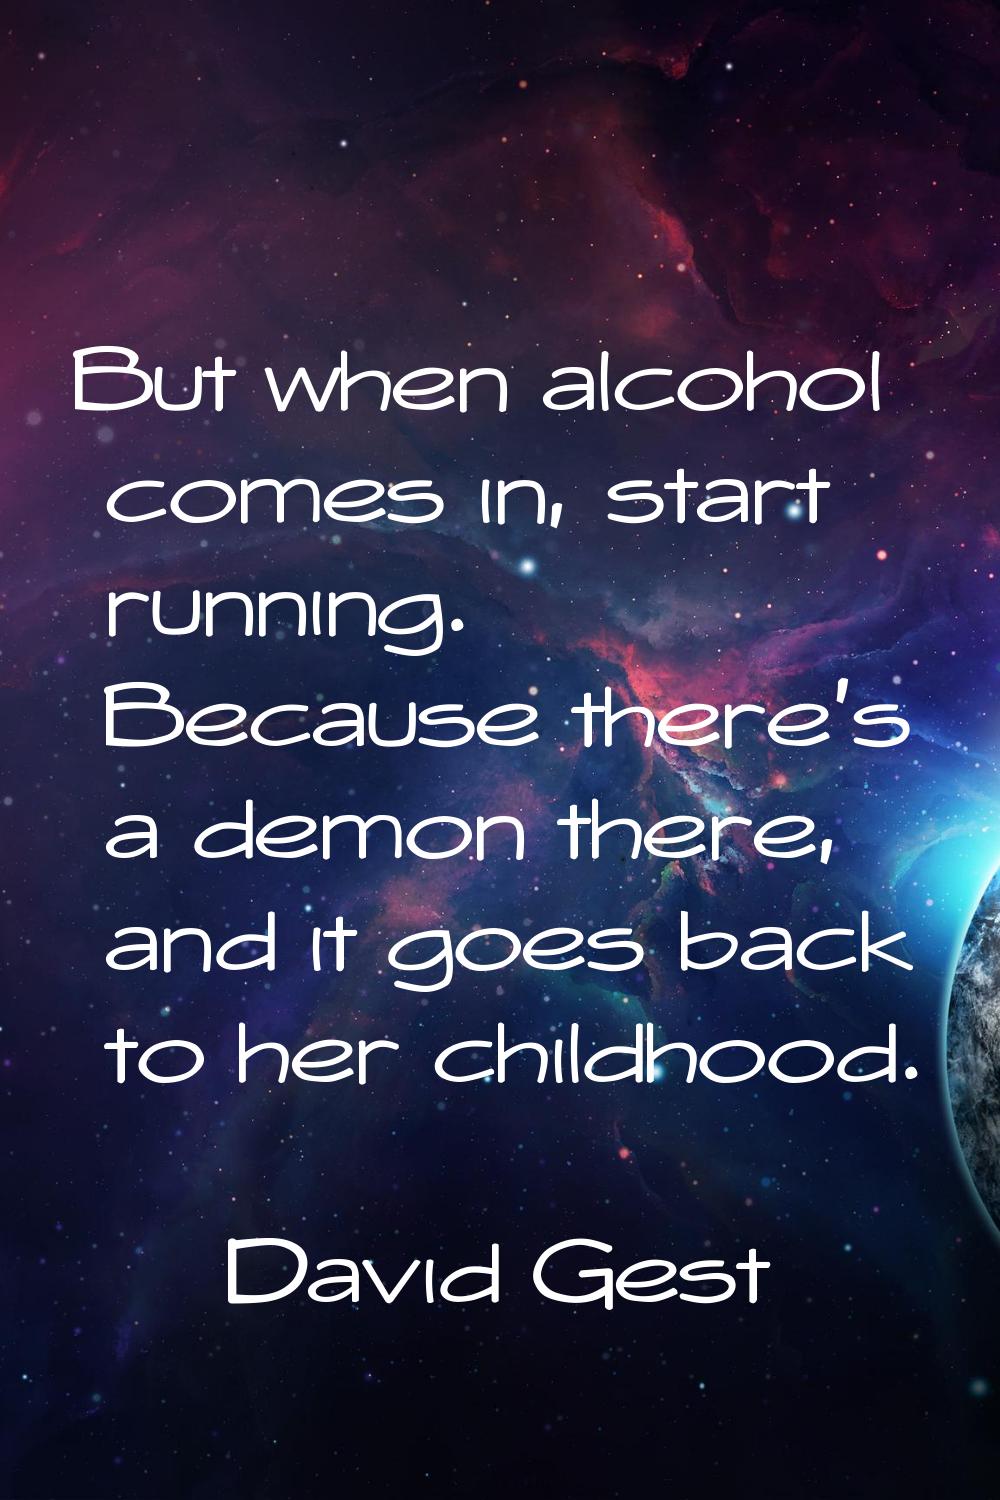 But when alcohol comes in, start running. Because there's a demon there, and it goes back to her ch